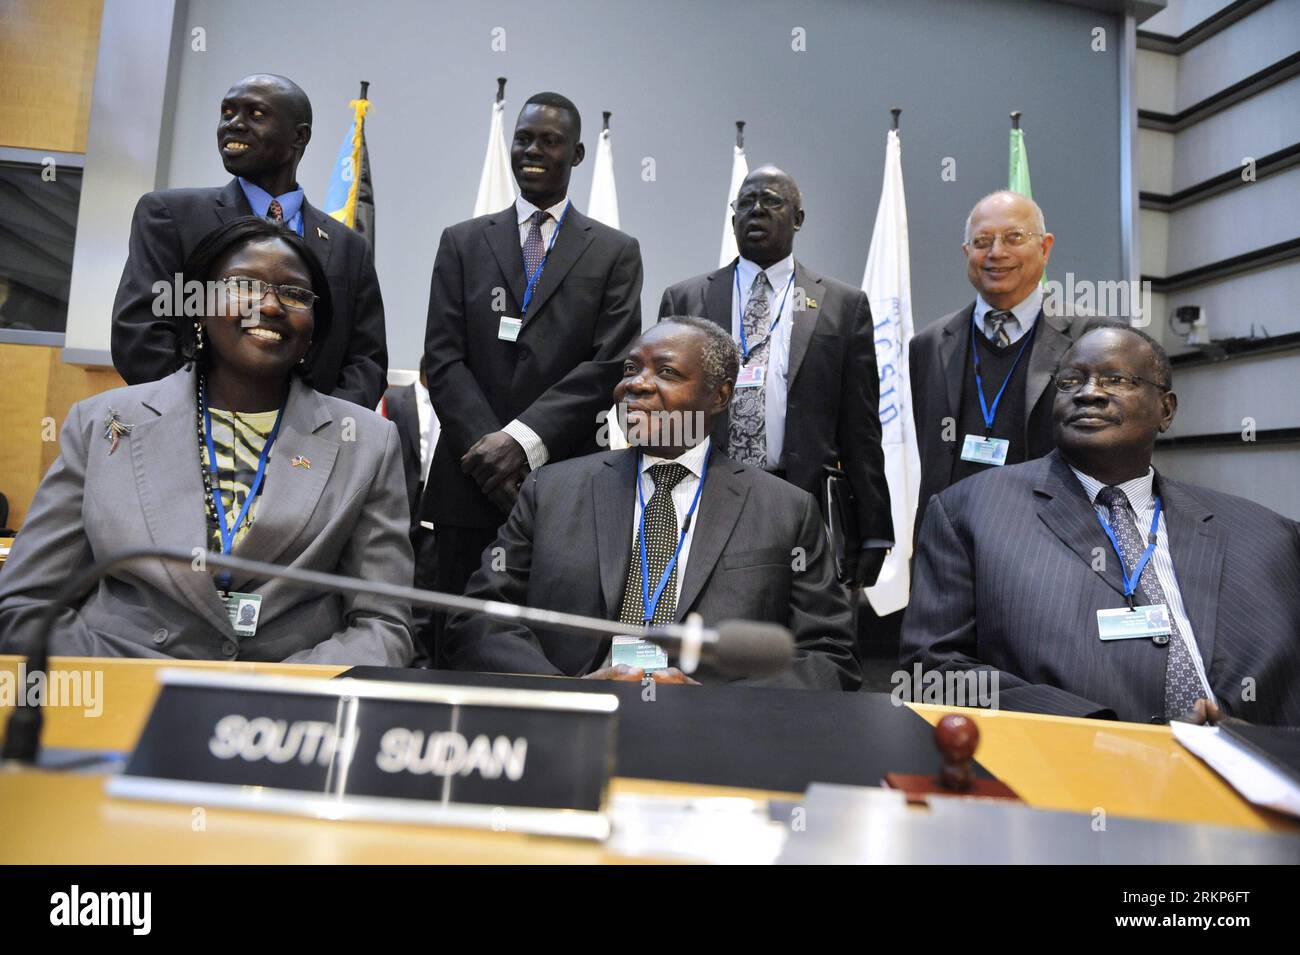 Bildnummer: 57911928  Datum: 18.04.2012  Copyright: imago/Xinhua (120418) -- WASHINGTON, April 18, 2012 (Xinhua) -- Members of South Sudan s delegation, led by Minister of Finance and Economic Planning Kosti Manibe Ngai (C front), pose for a photo during a ceremony signing the Articles of Agreement and Conventions of the World Bank Group at its headquarters in Washington D.C., capital of the United States, April 18, 2012. The Republic of South Sudan on Wednesday became the newest member of the World Bank Group (WBG) and also joined the International Monetary Fund (IMF). (Xinhua/Zhang Jun)(zx) Stock Photo